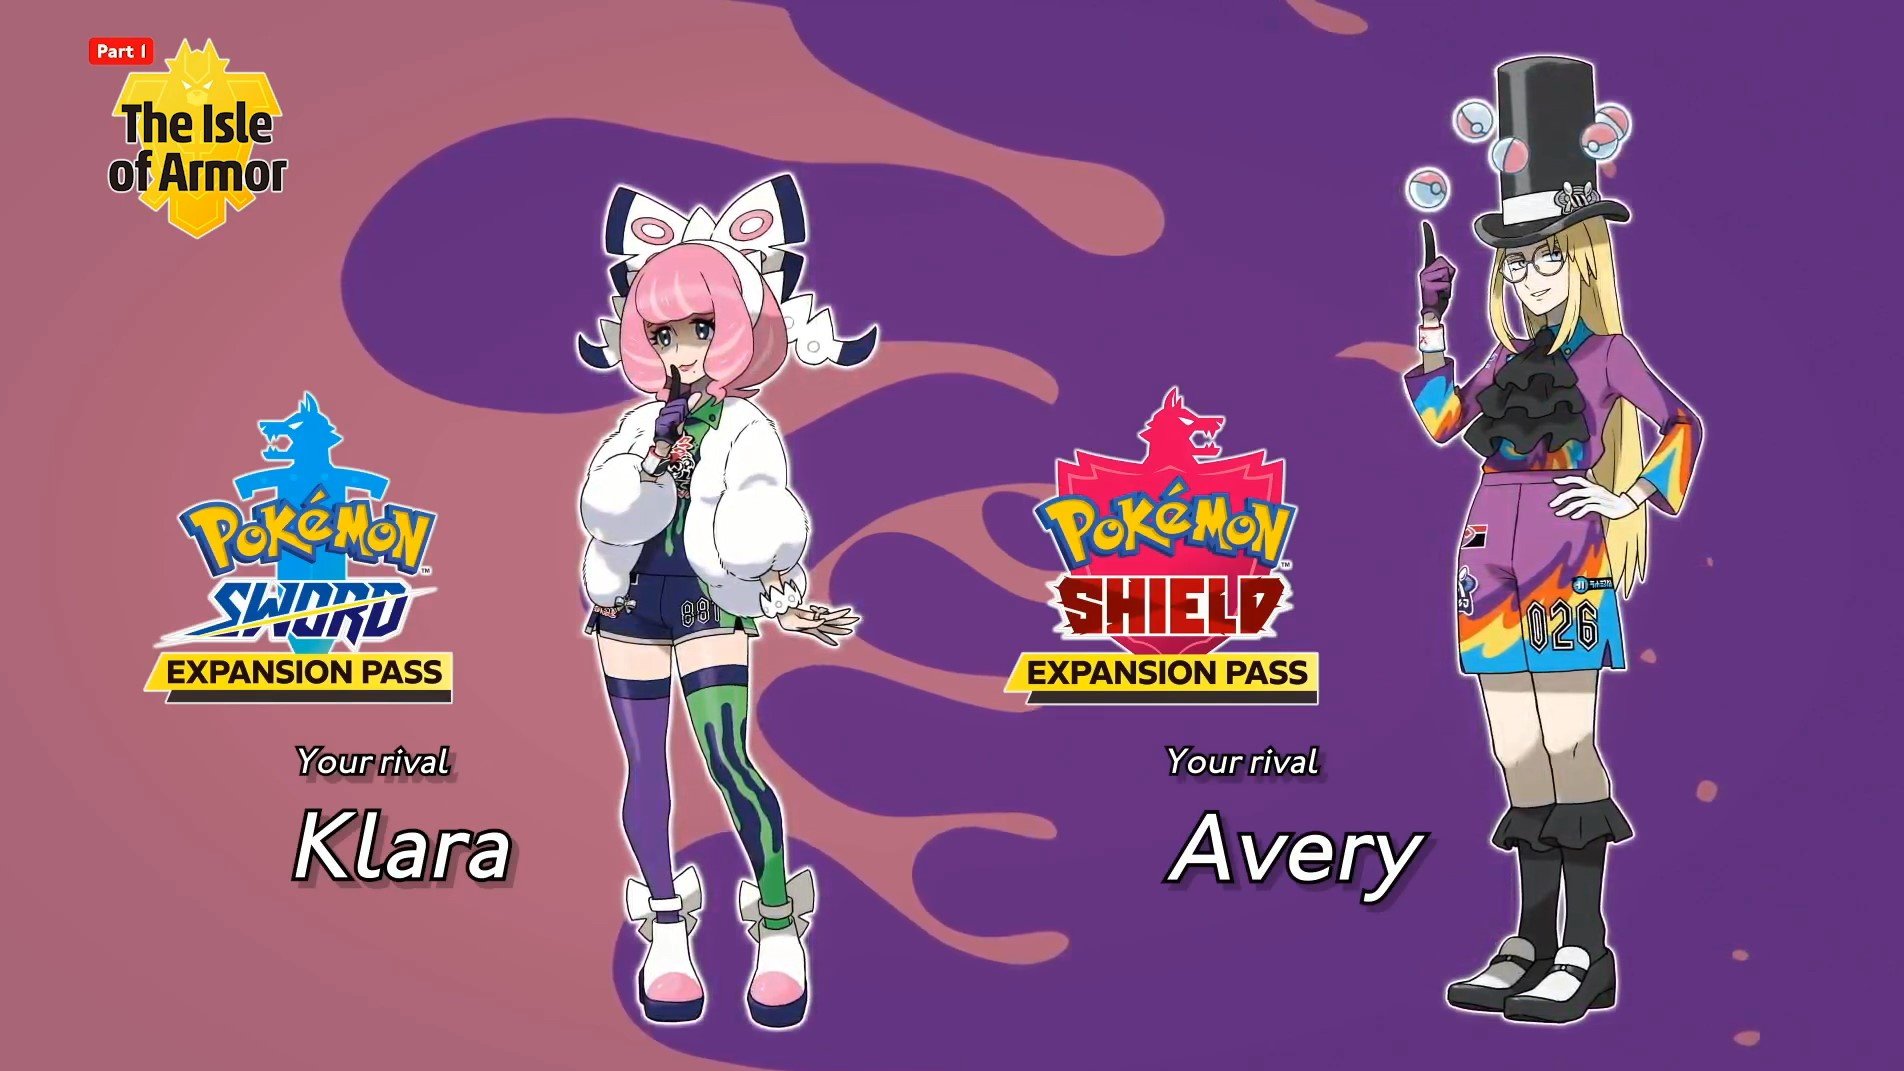 Pokemon Sword And Shield Expansion Pass Isle Of Armor New Pokemon All You Need To Know Plus All Returning Pokemon Nintendo Life - 2 new pokemon party codes roblox pokemon party